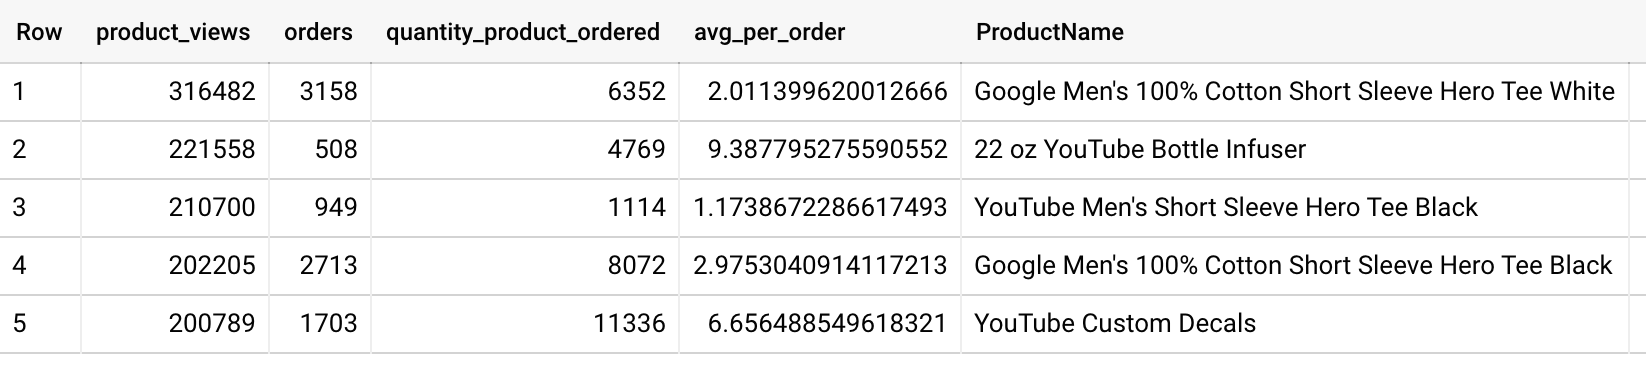 A table containing five rows of product_views, orders, quantity_product_ordered_, avh_per_order, and v2ProductName.